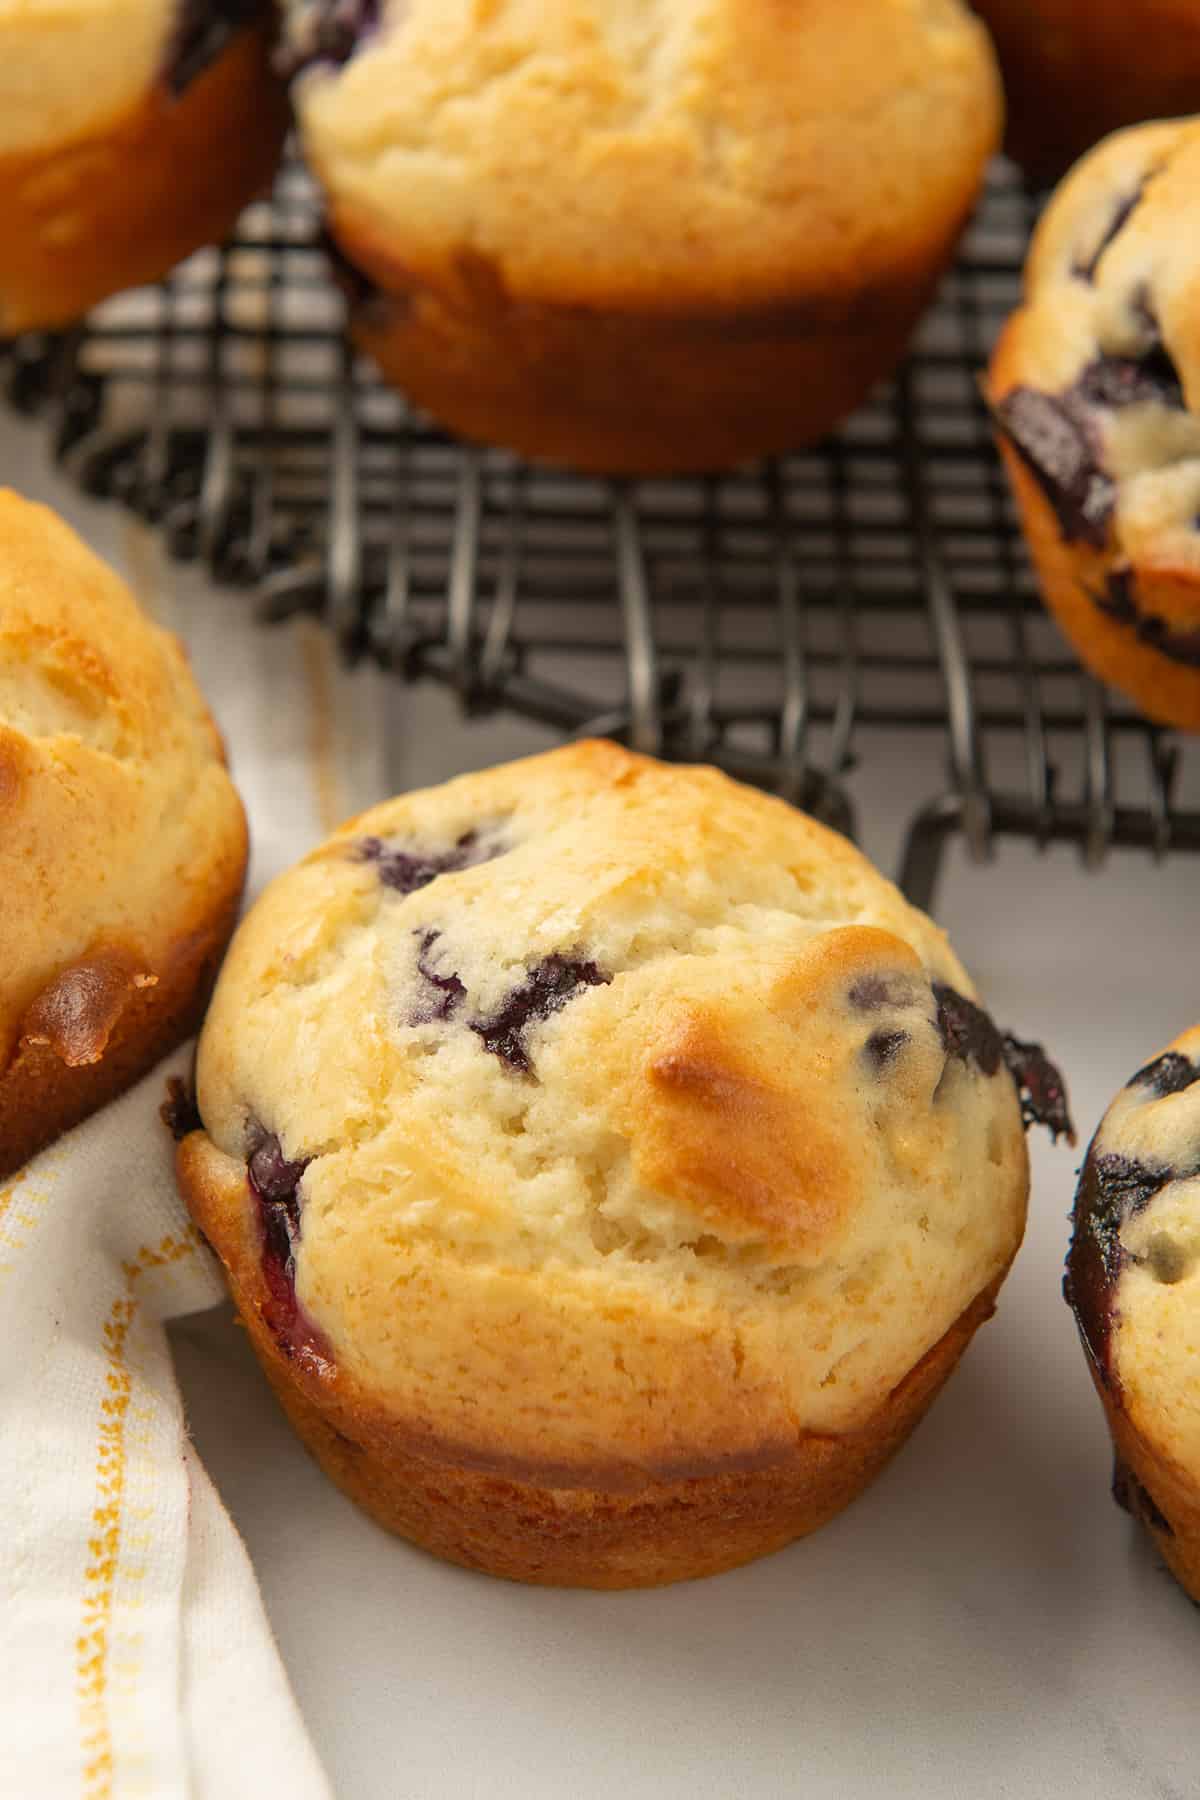 Blueberry muffins cooling on a wire rack.